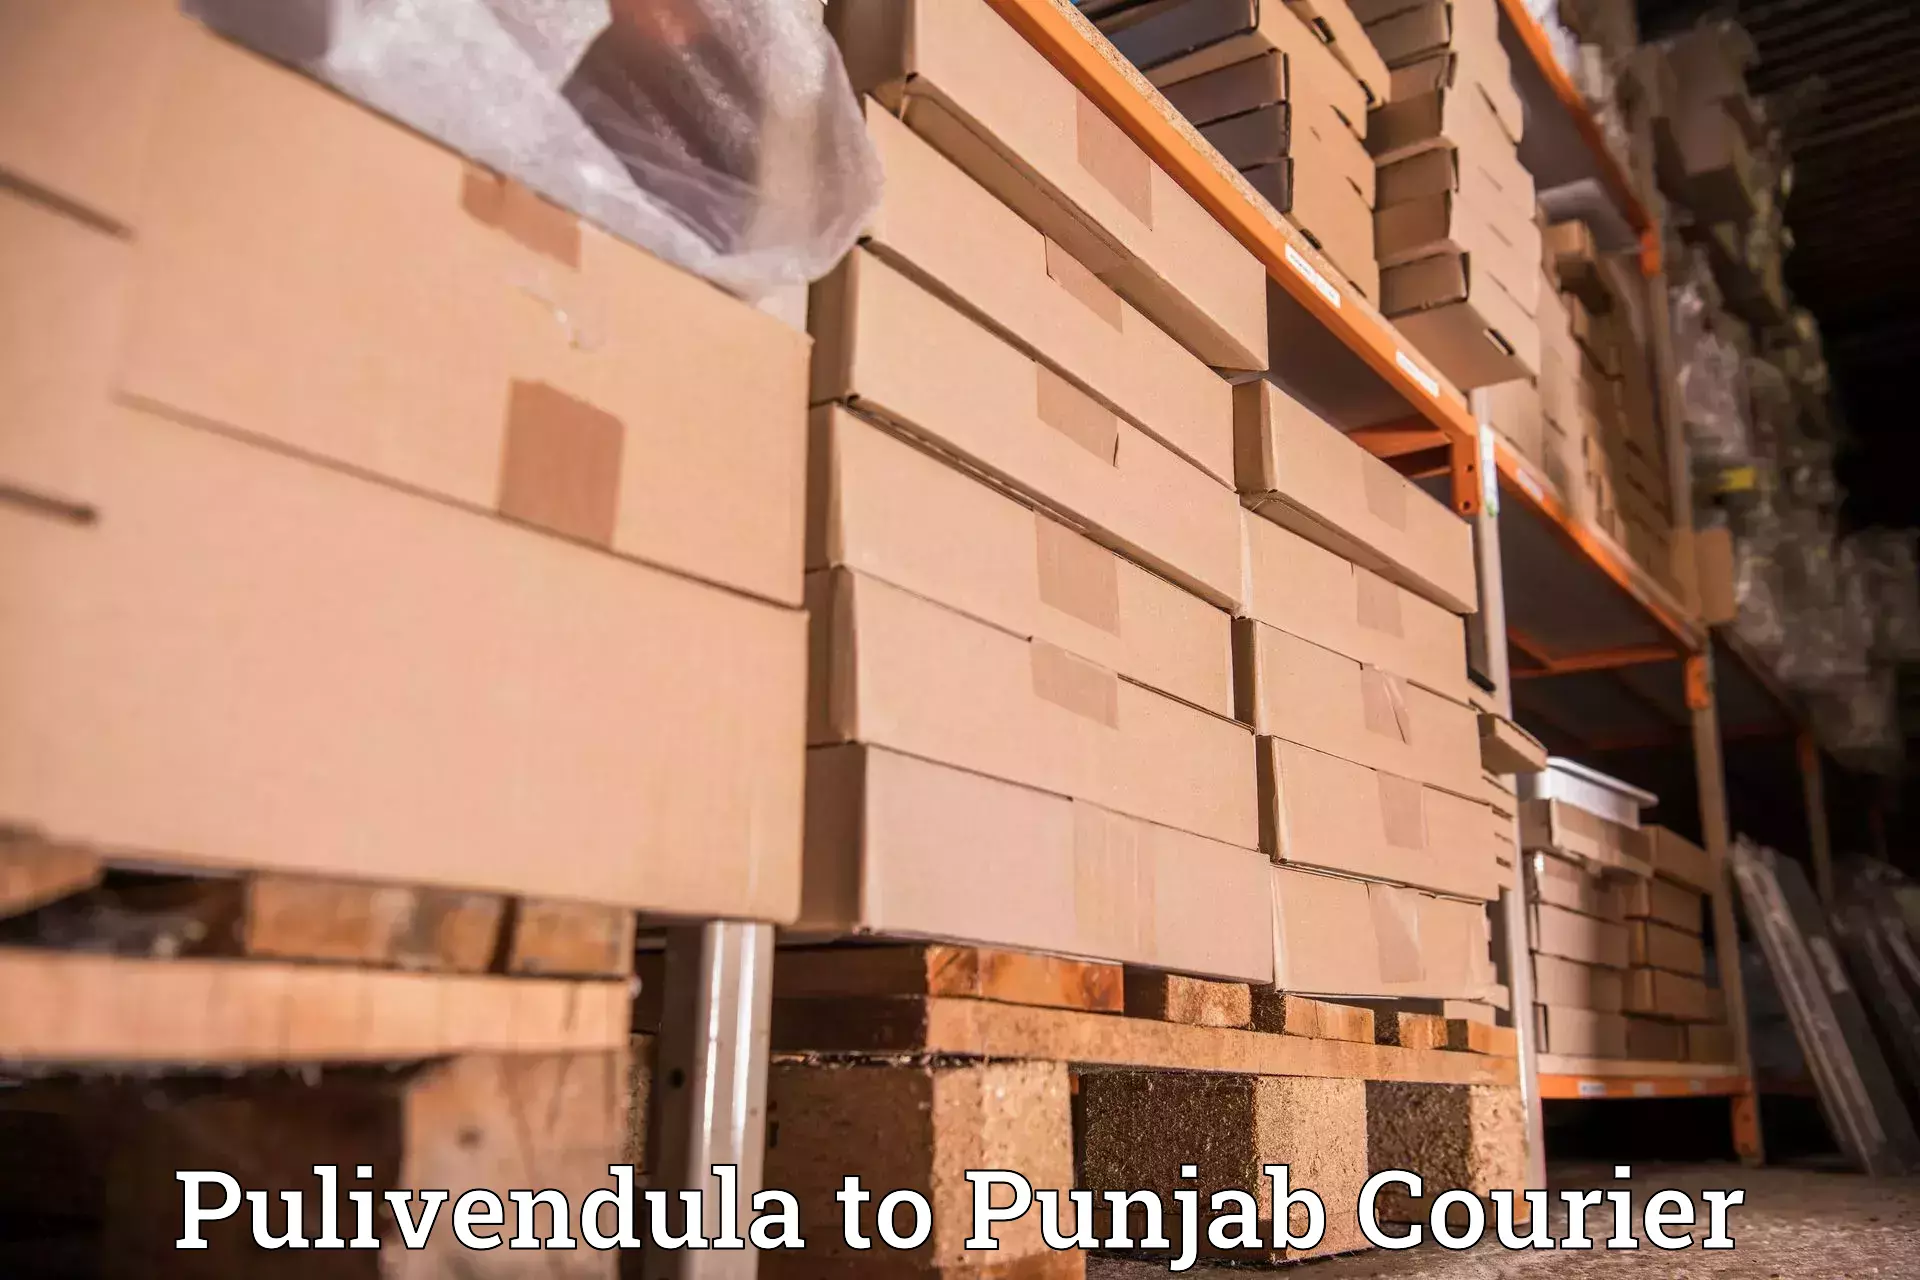 Efficient freight service Pulivendula to Zirakpur